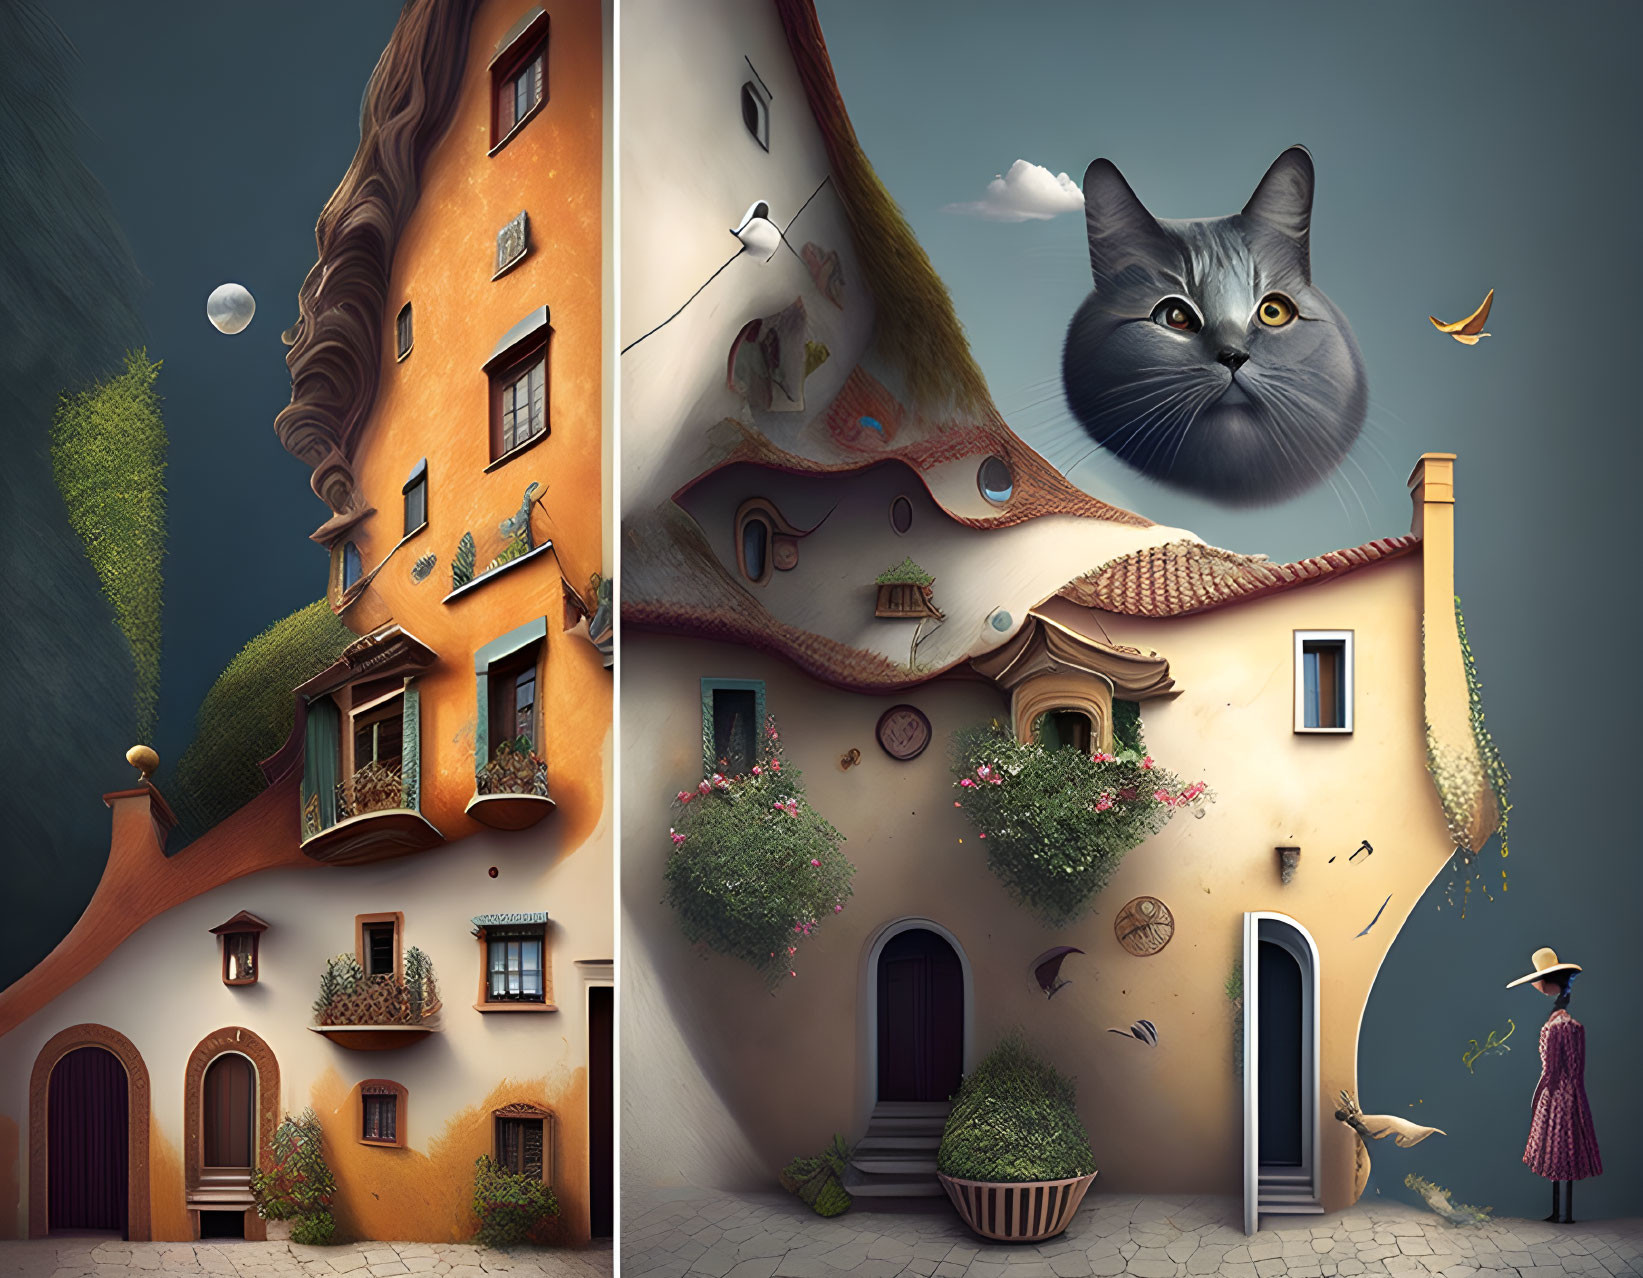 Whimsical surreal artwork: Curvy houses, giant cat face, floating objects